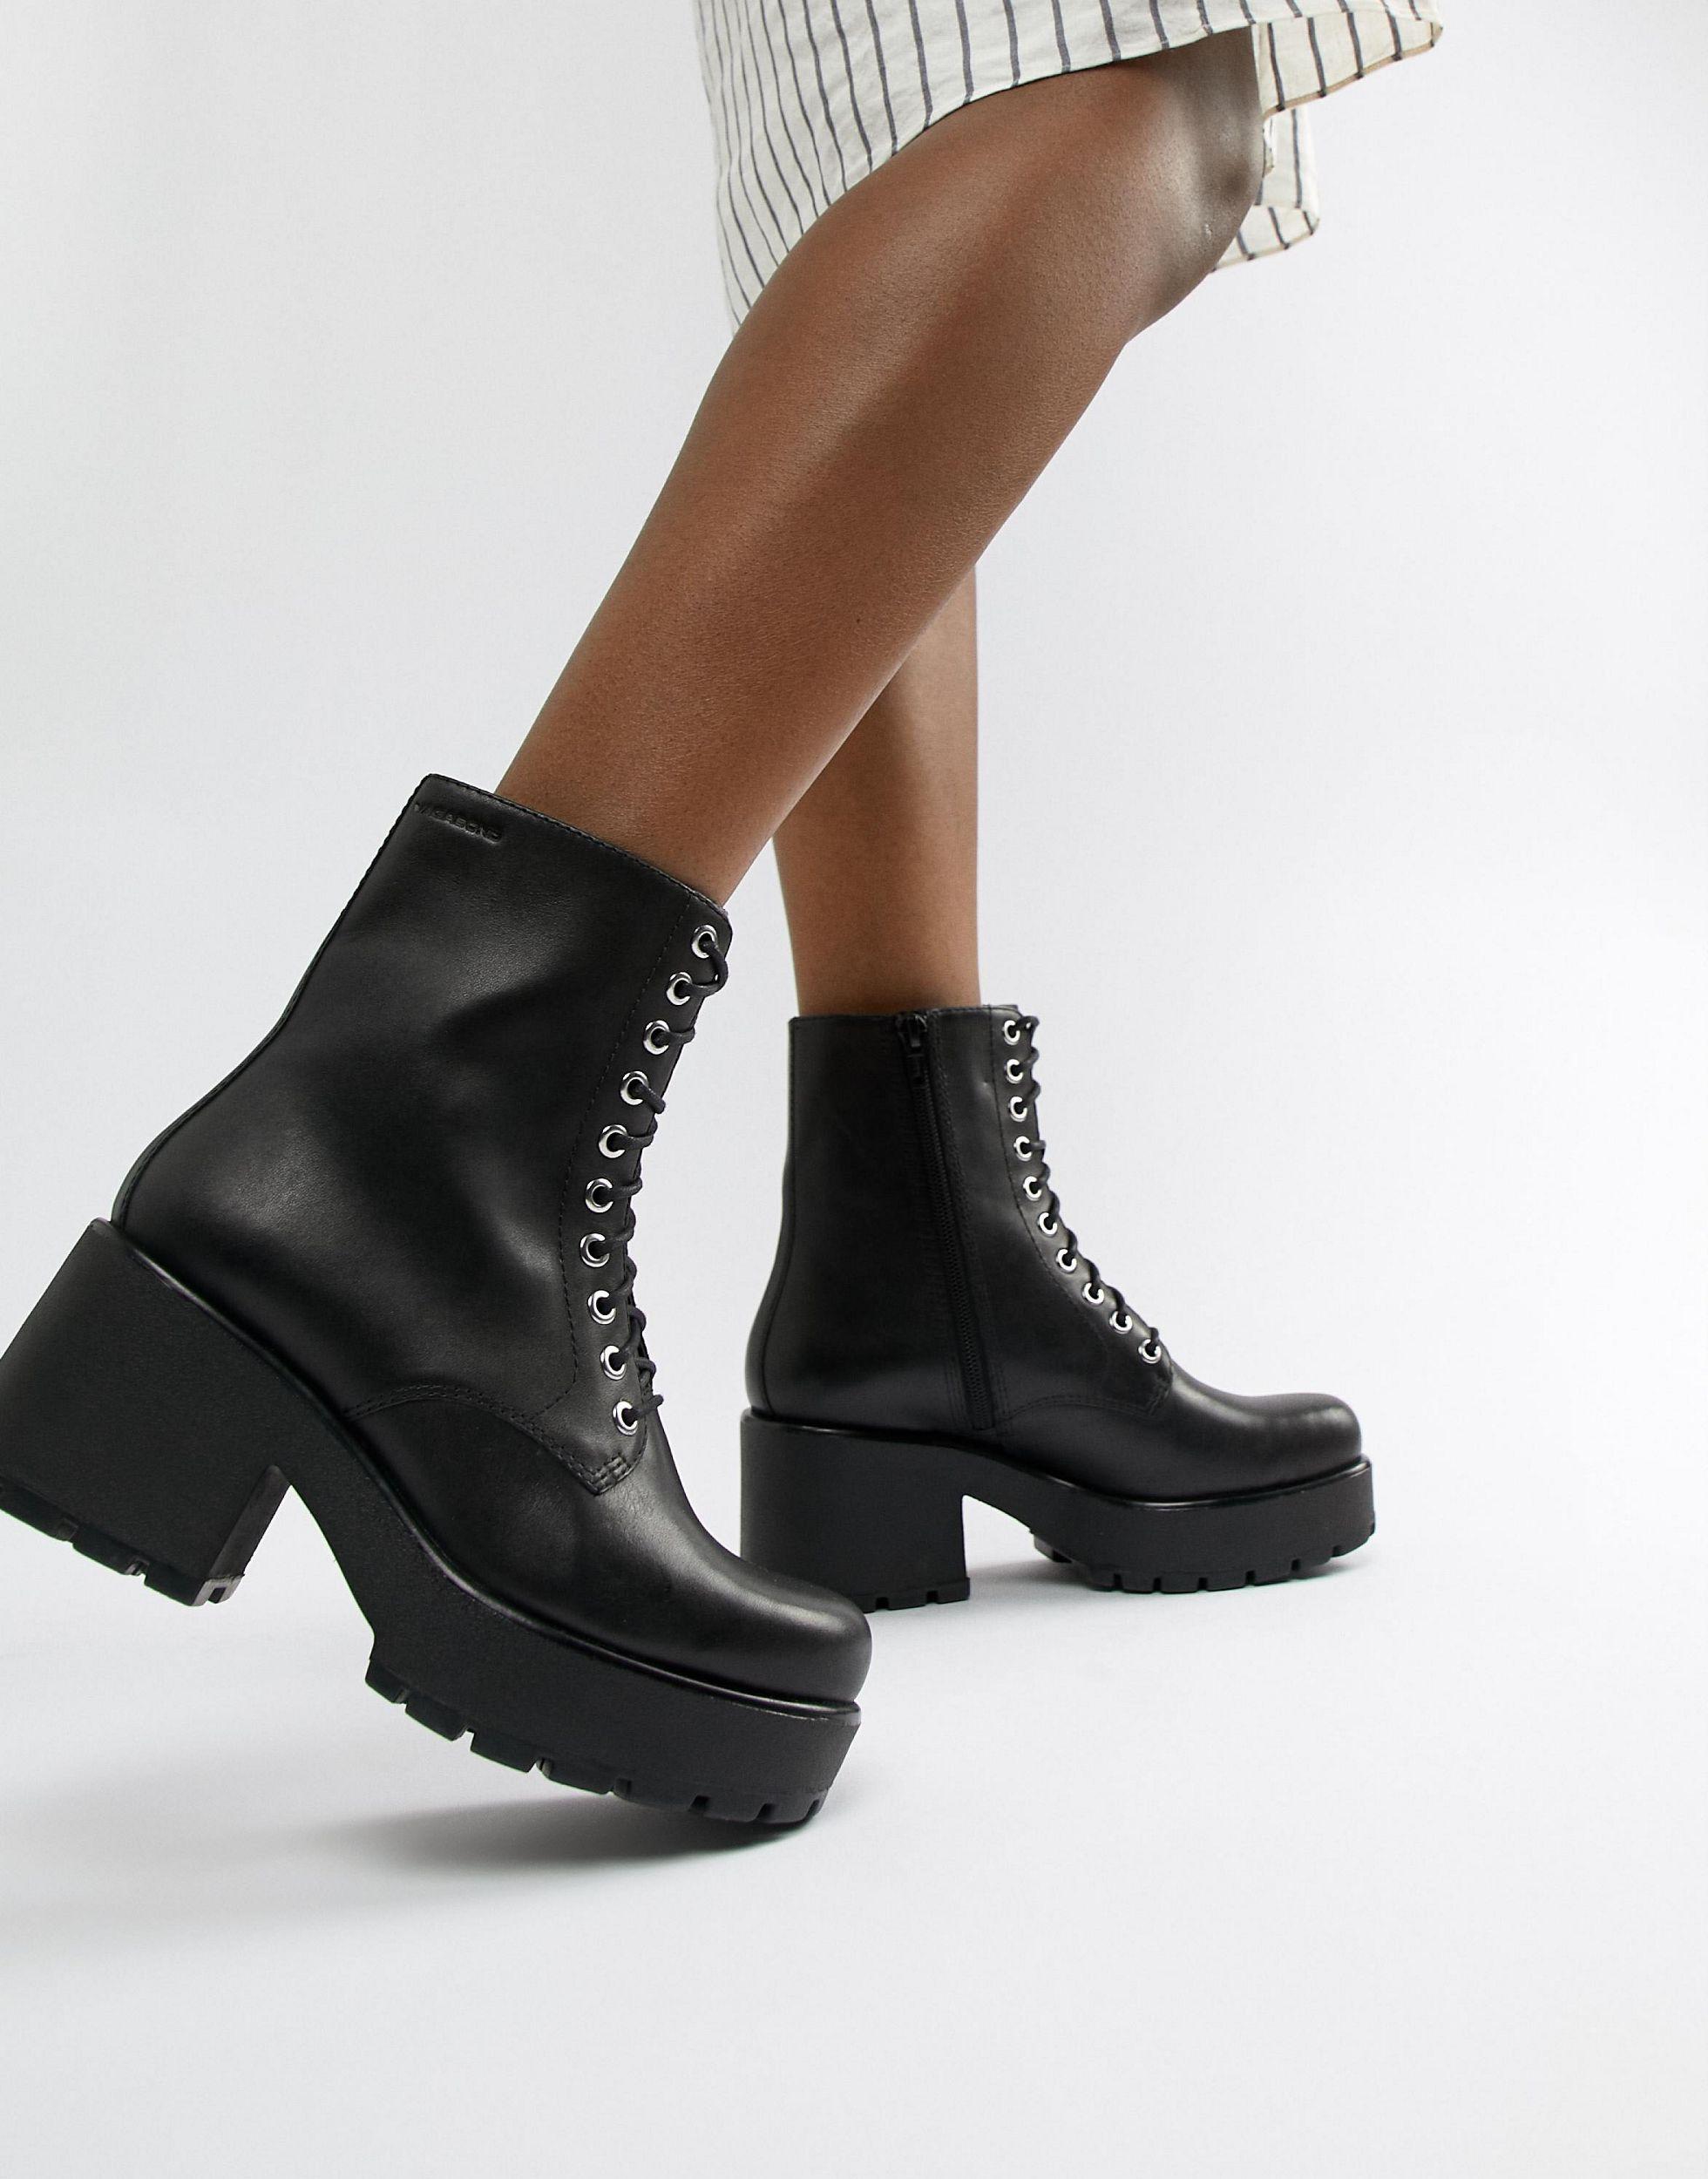 Vagabond Shoemakers Dioon Lace Up Leather Ankle Boots in Black | Lyst